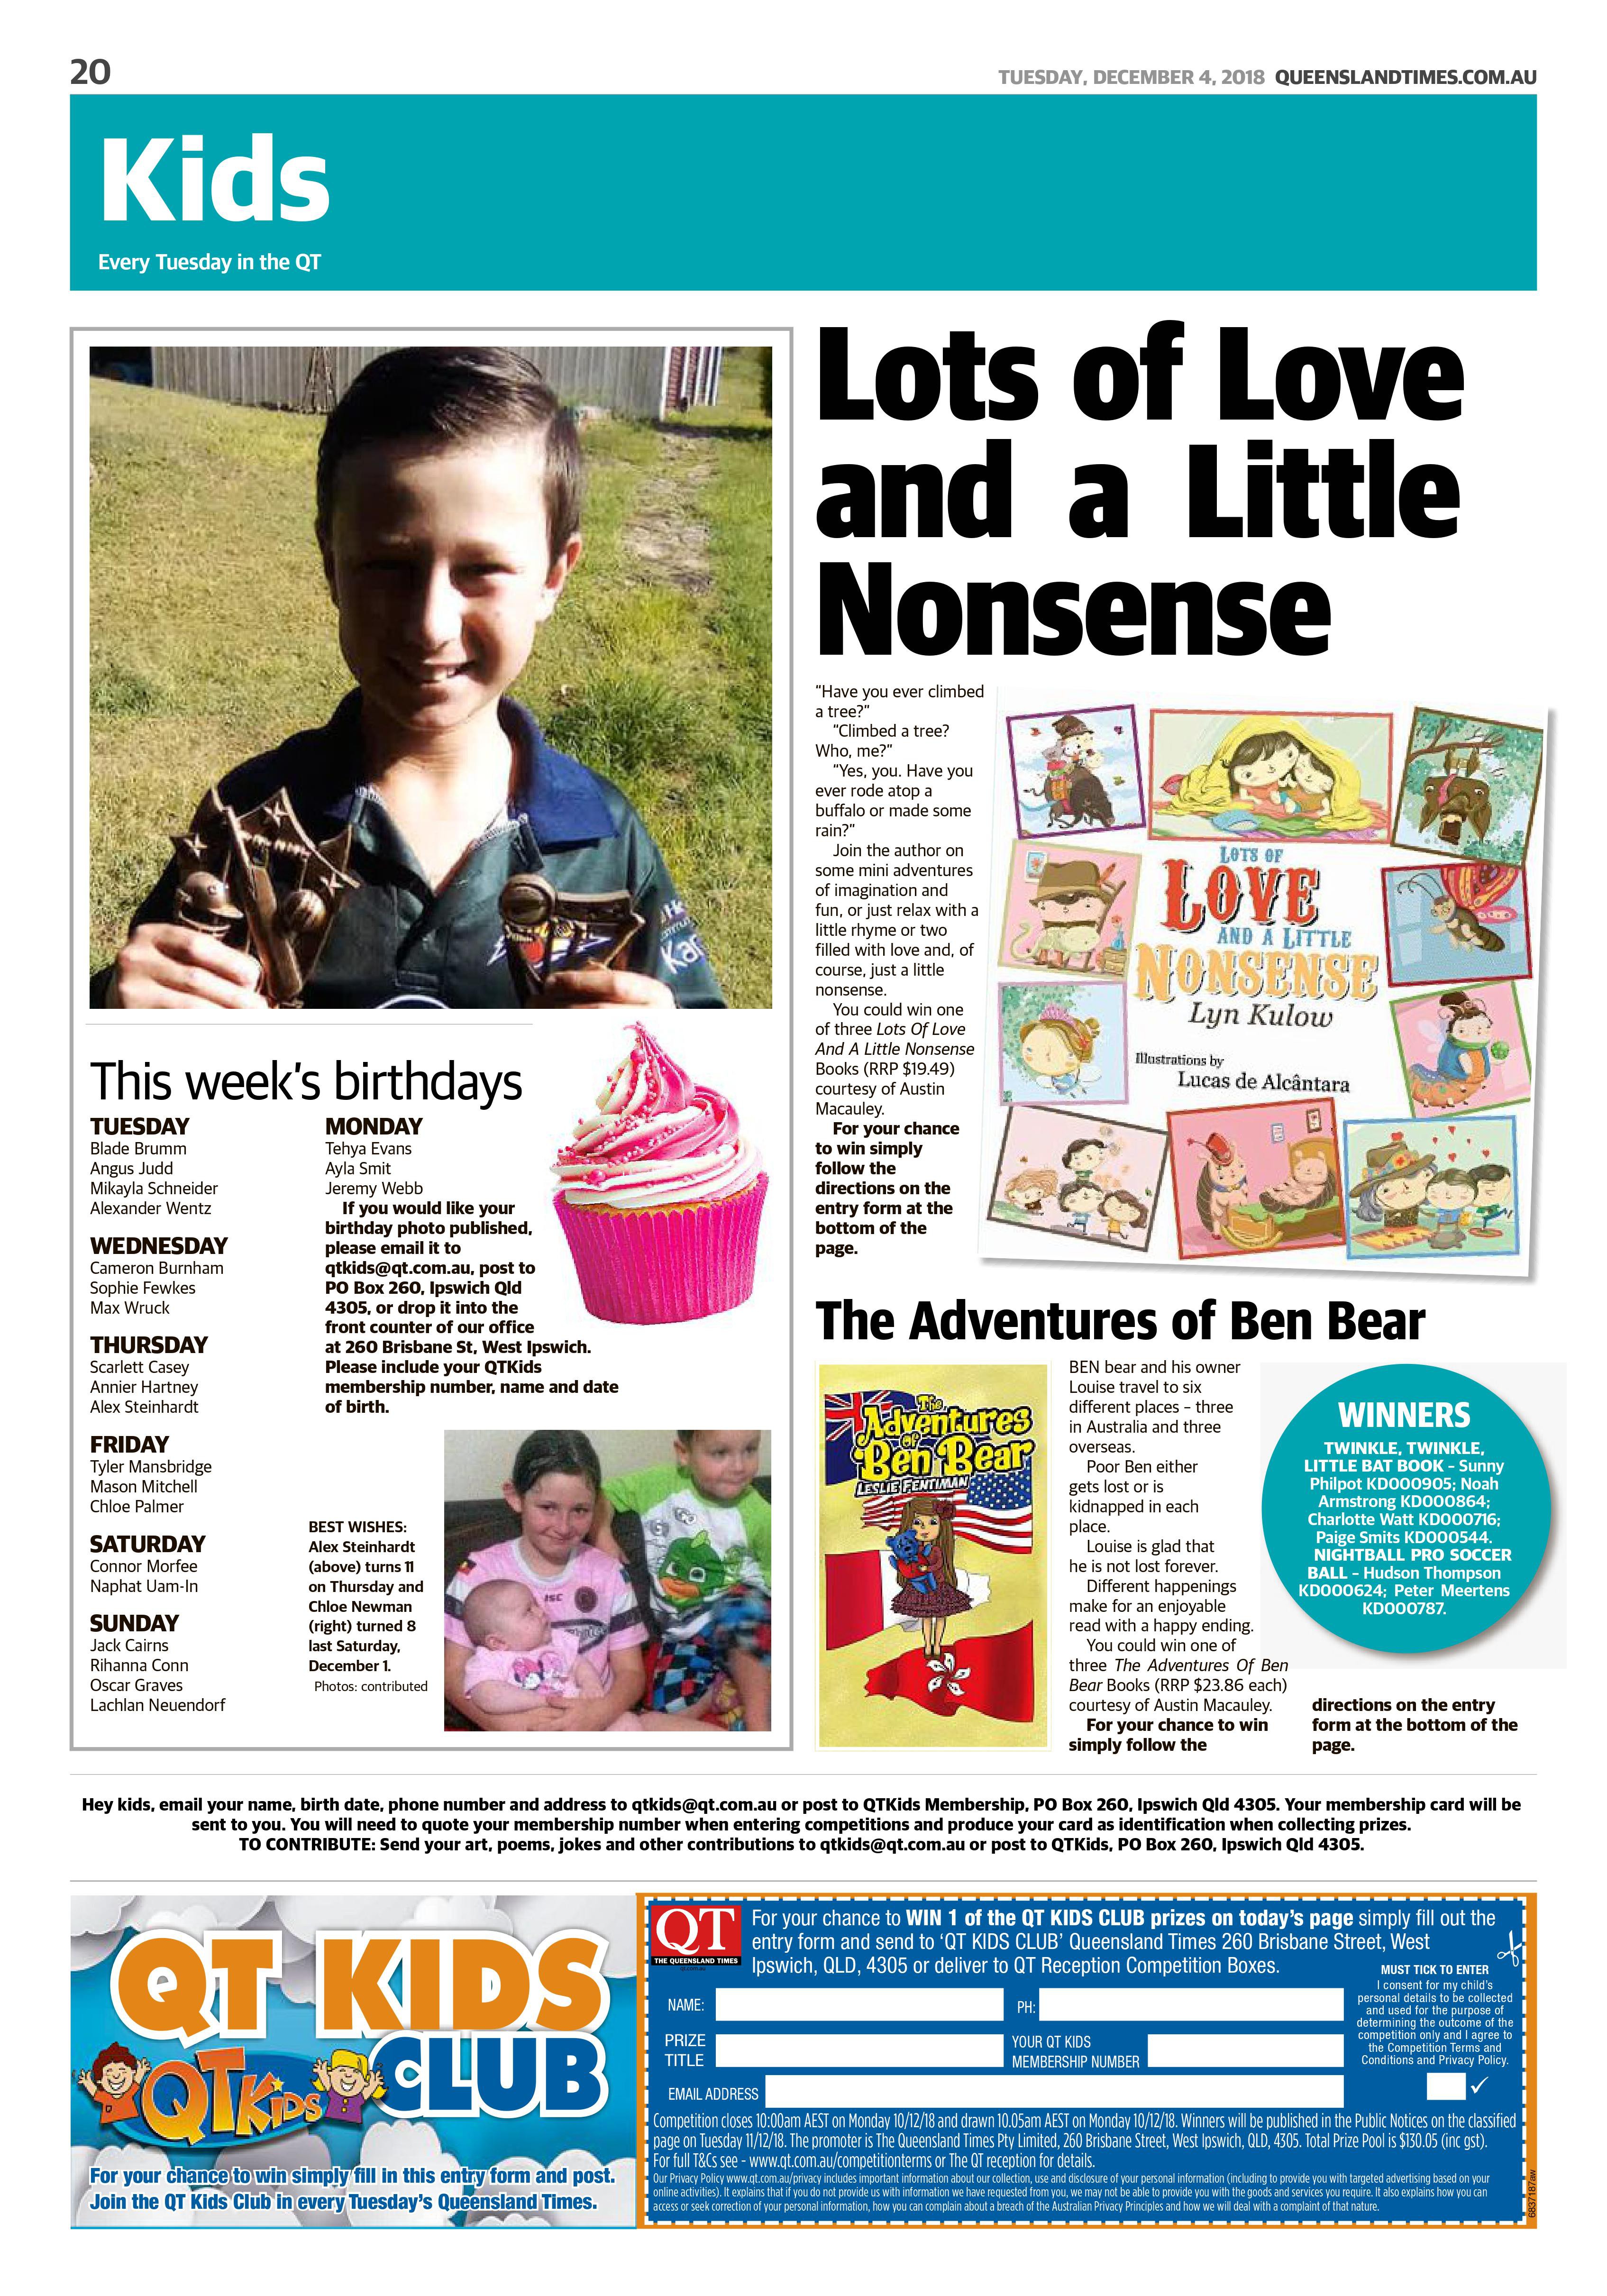 ‘The Adventures of Ben Bear’ Featured in the “Queensland Times”